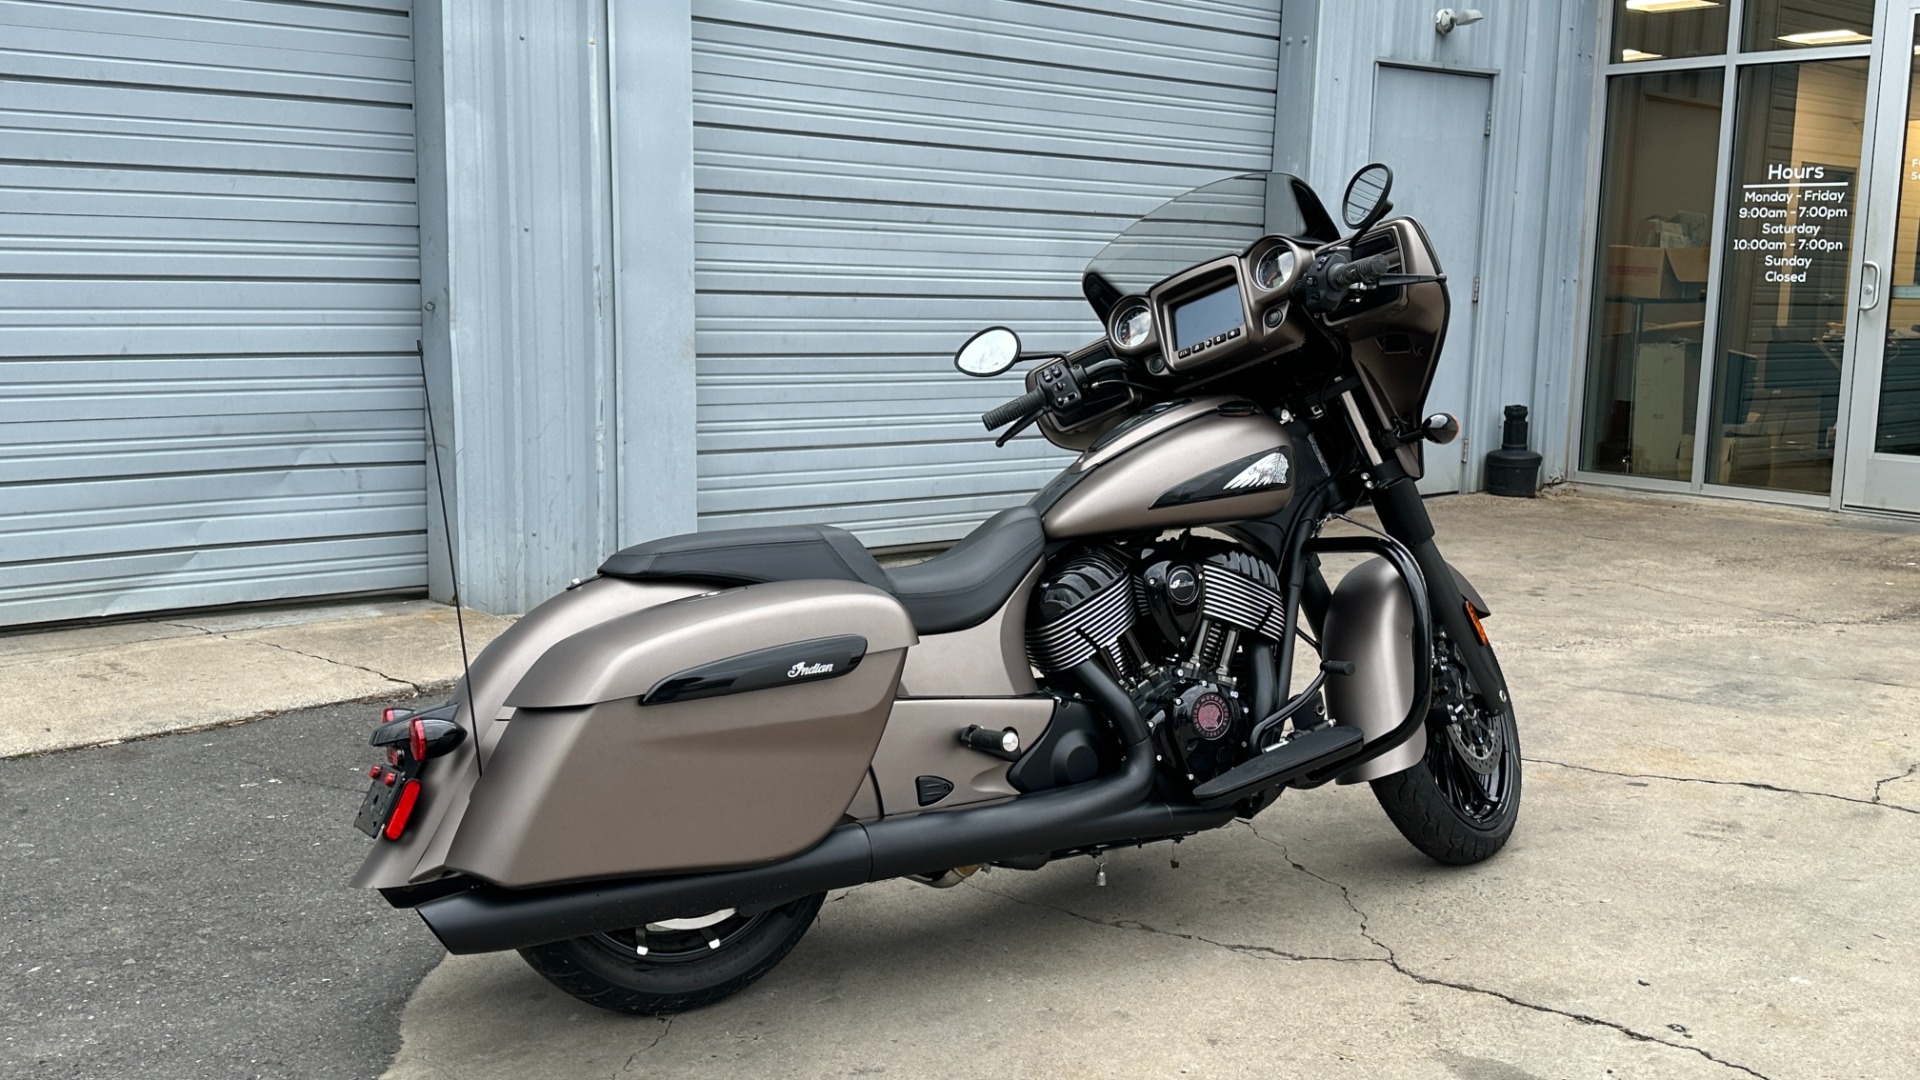 Used 2019 INDIAN CHIEFTAIN DARK HORSE / MATTE PAINT / LOW MILES / NAV / CRUISE CONTROL / TOUCHSCREEN for sale Sold at Formula Imports in Charlotte NC 28227 3